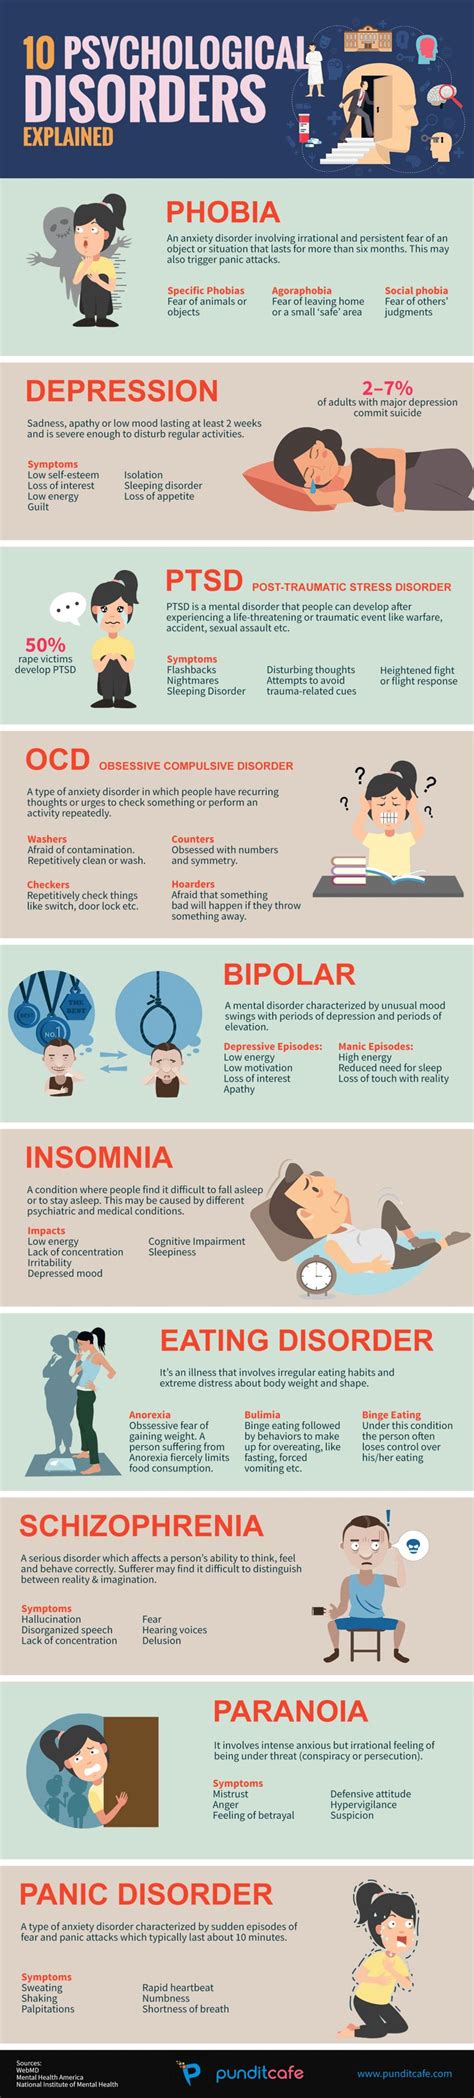 10 psychological disorders explained infographic in 2020 psychology disorders psychology